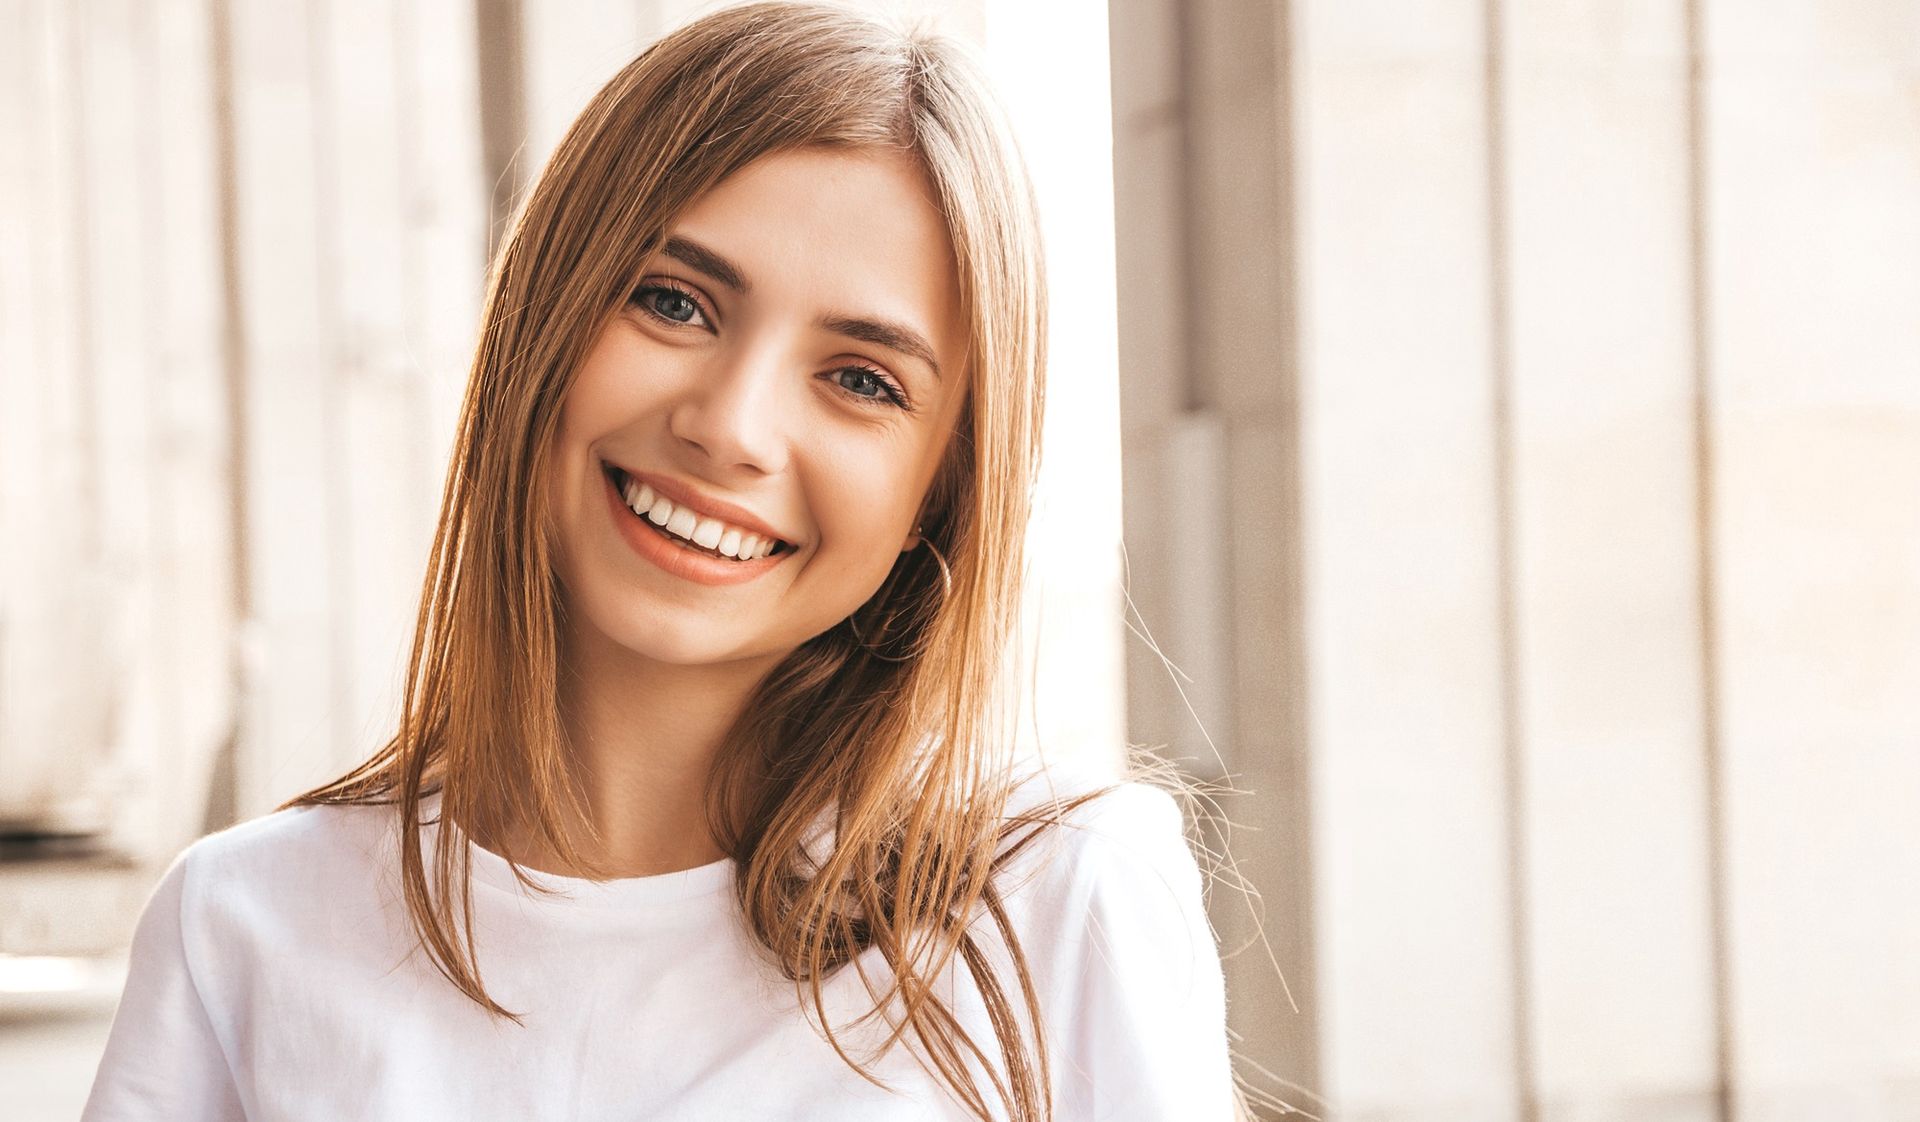 Portrait of beautiful smiling blond girl